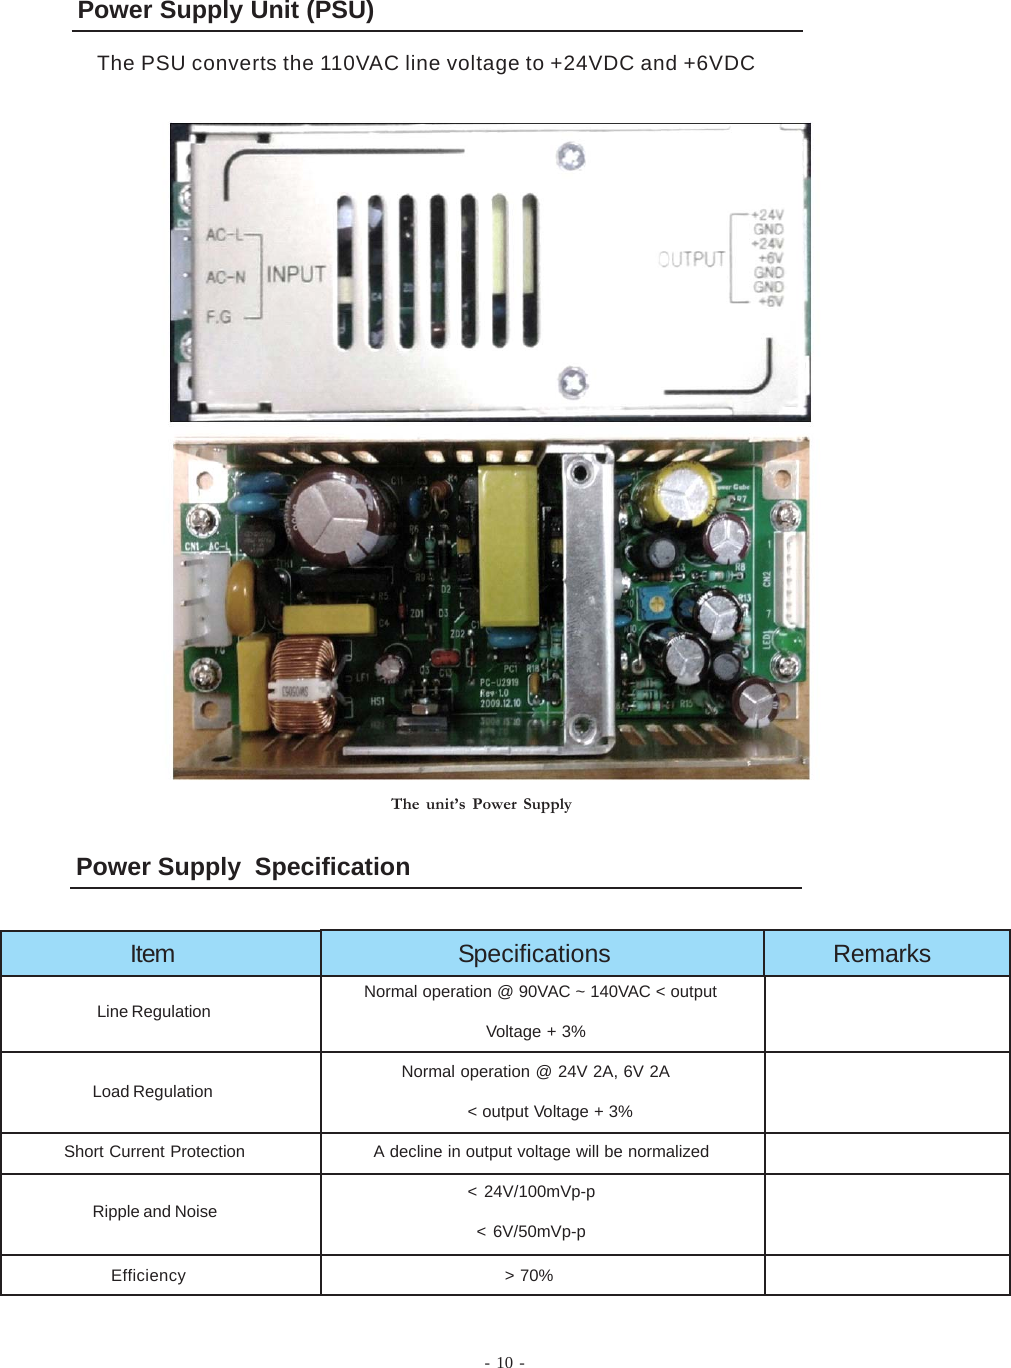 - 10 -Power Supply Unit (PSU)The PSU converts the 110VAC line voltage to +24VDC and +6VDCNormal operation @ 90VAC ~ 140VAC &lt; outputLine Regulation Voltage + 3%Normal operation @ 24V 2A, 6V 2ALoad Regulation &lt; output Voltage + 3%Short Current Protection A decline in output voltage will be normalized&lt; 24V/100mVp-pRipple and Noise &lt; 6V/50mVp-pEfficiency &gt; 70%Power Supply  SpecificationItem Specifications RemarksThe unit’s Power Supply